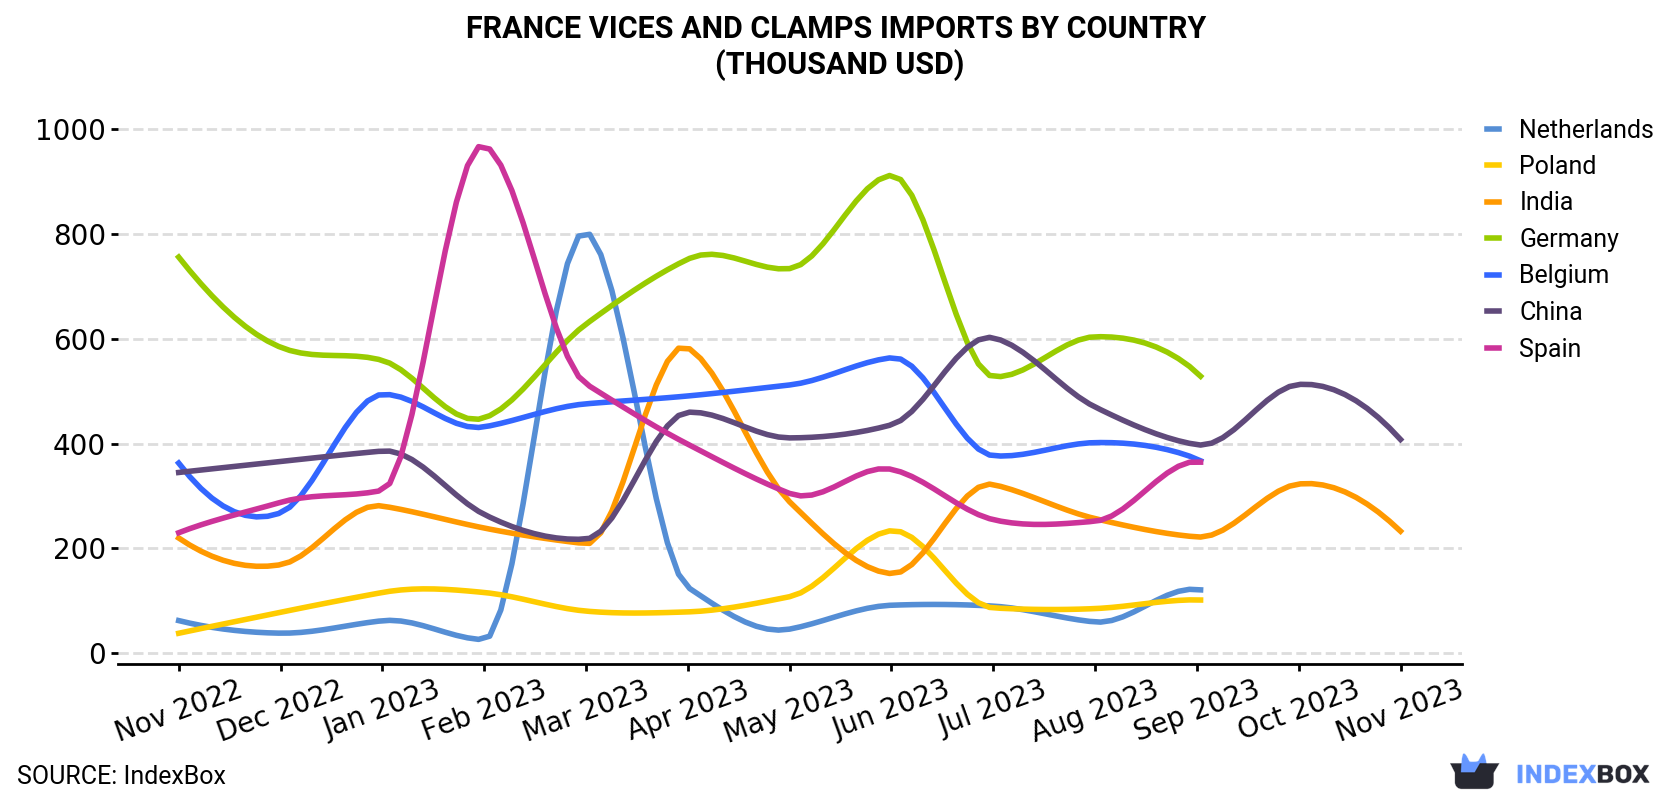 France Vices And Clamps Imports By Country (Thousand USD)